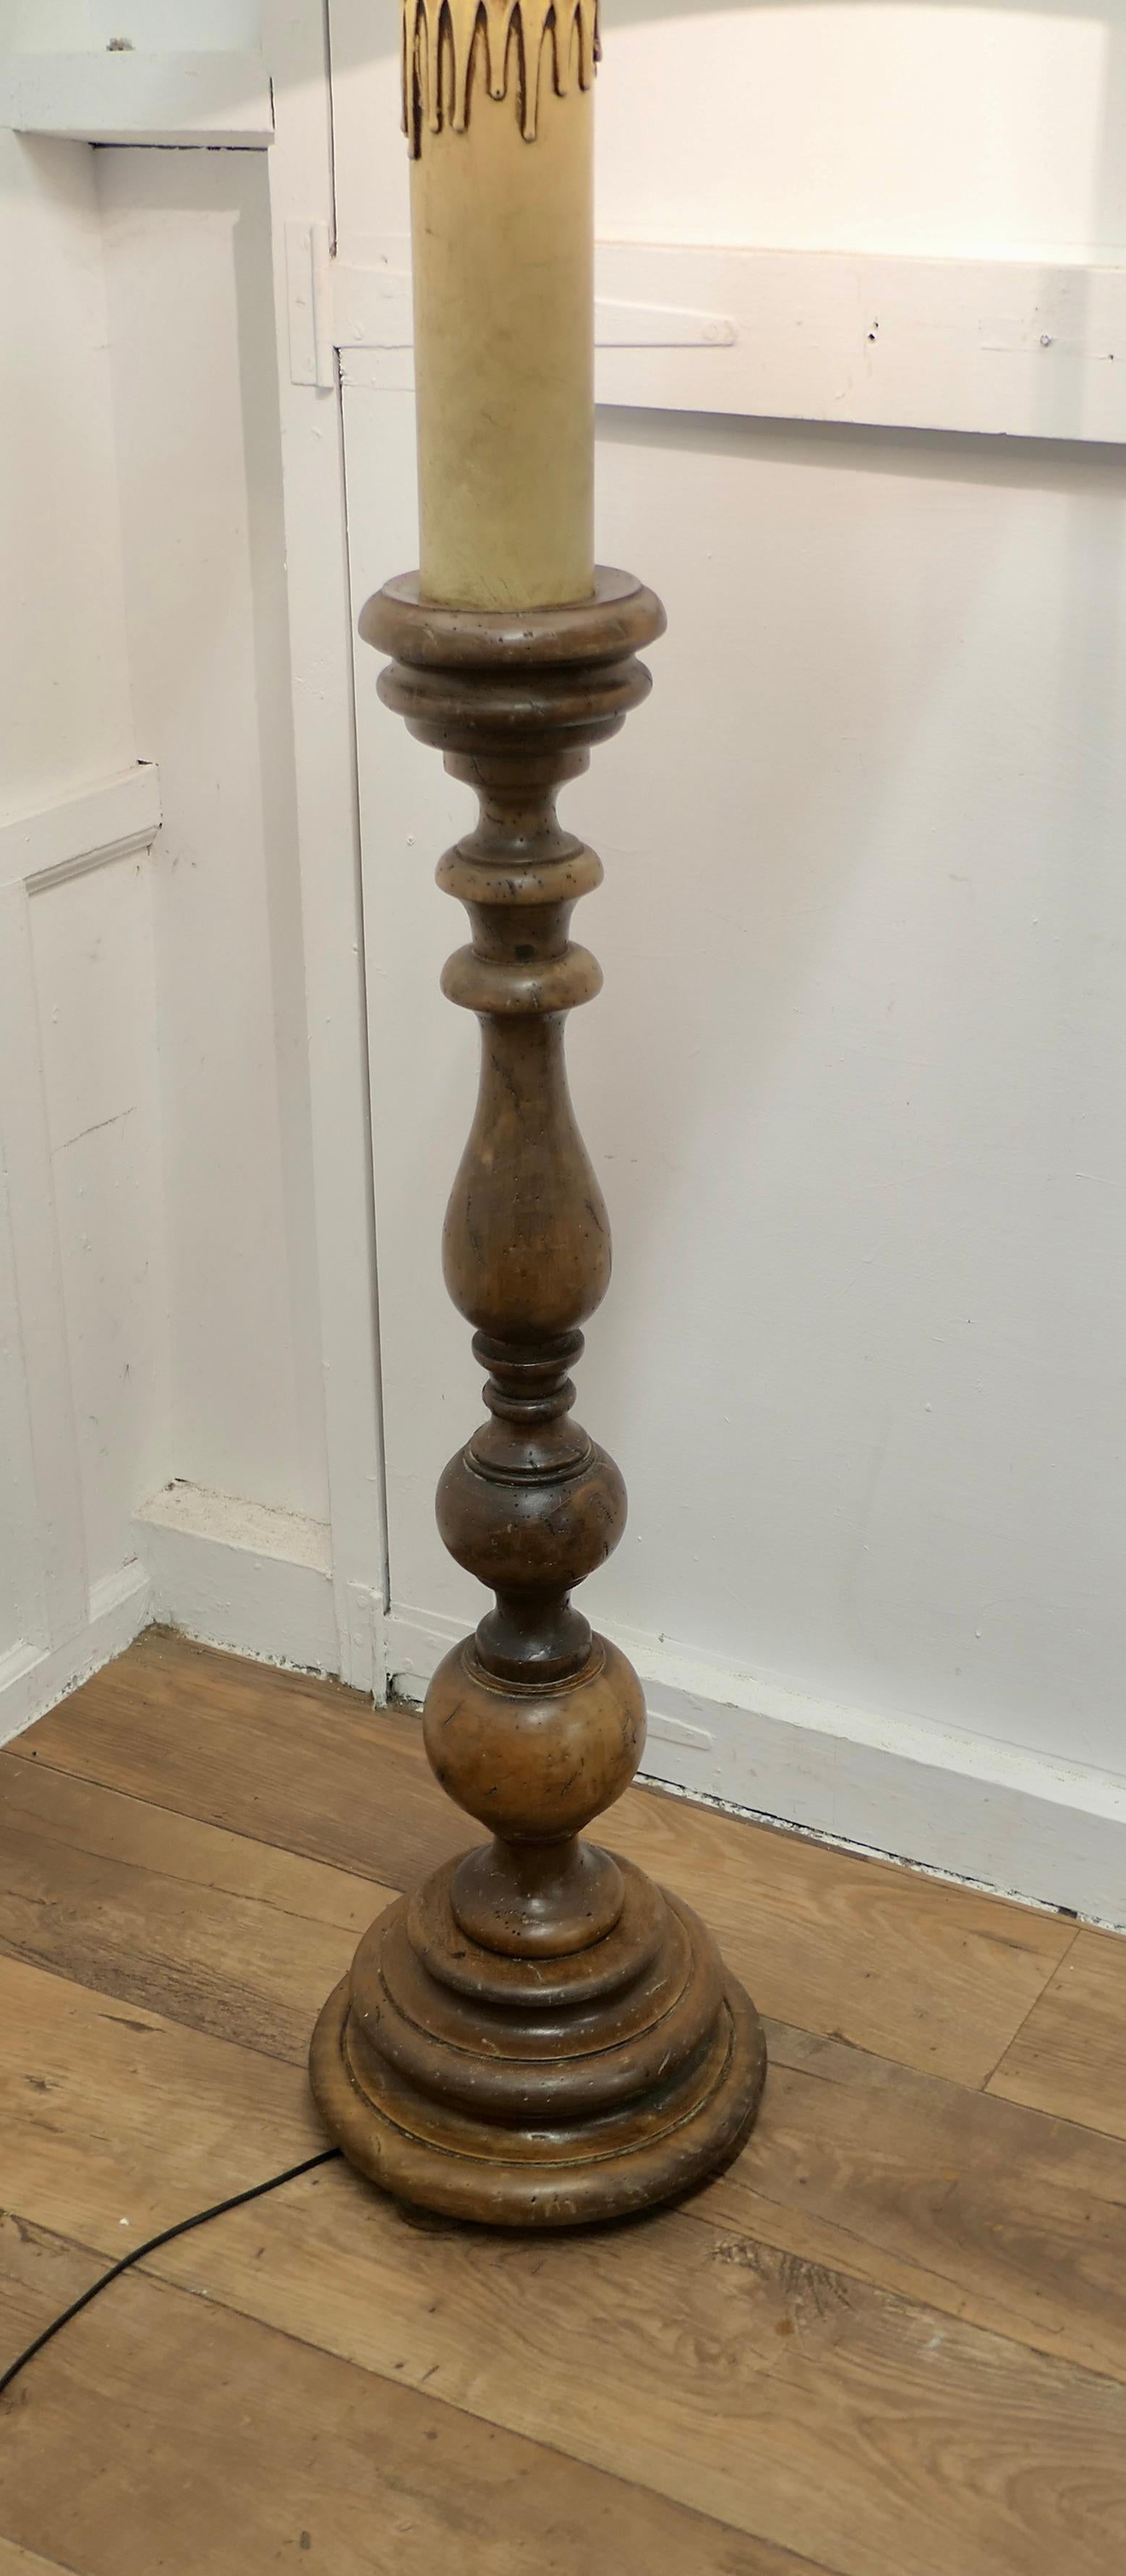 Chunky French Chestnut Standard Floor Lamp   This lamp is a good country piece  2